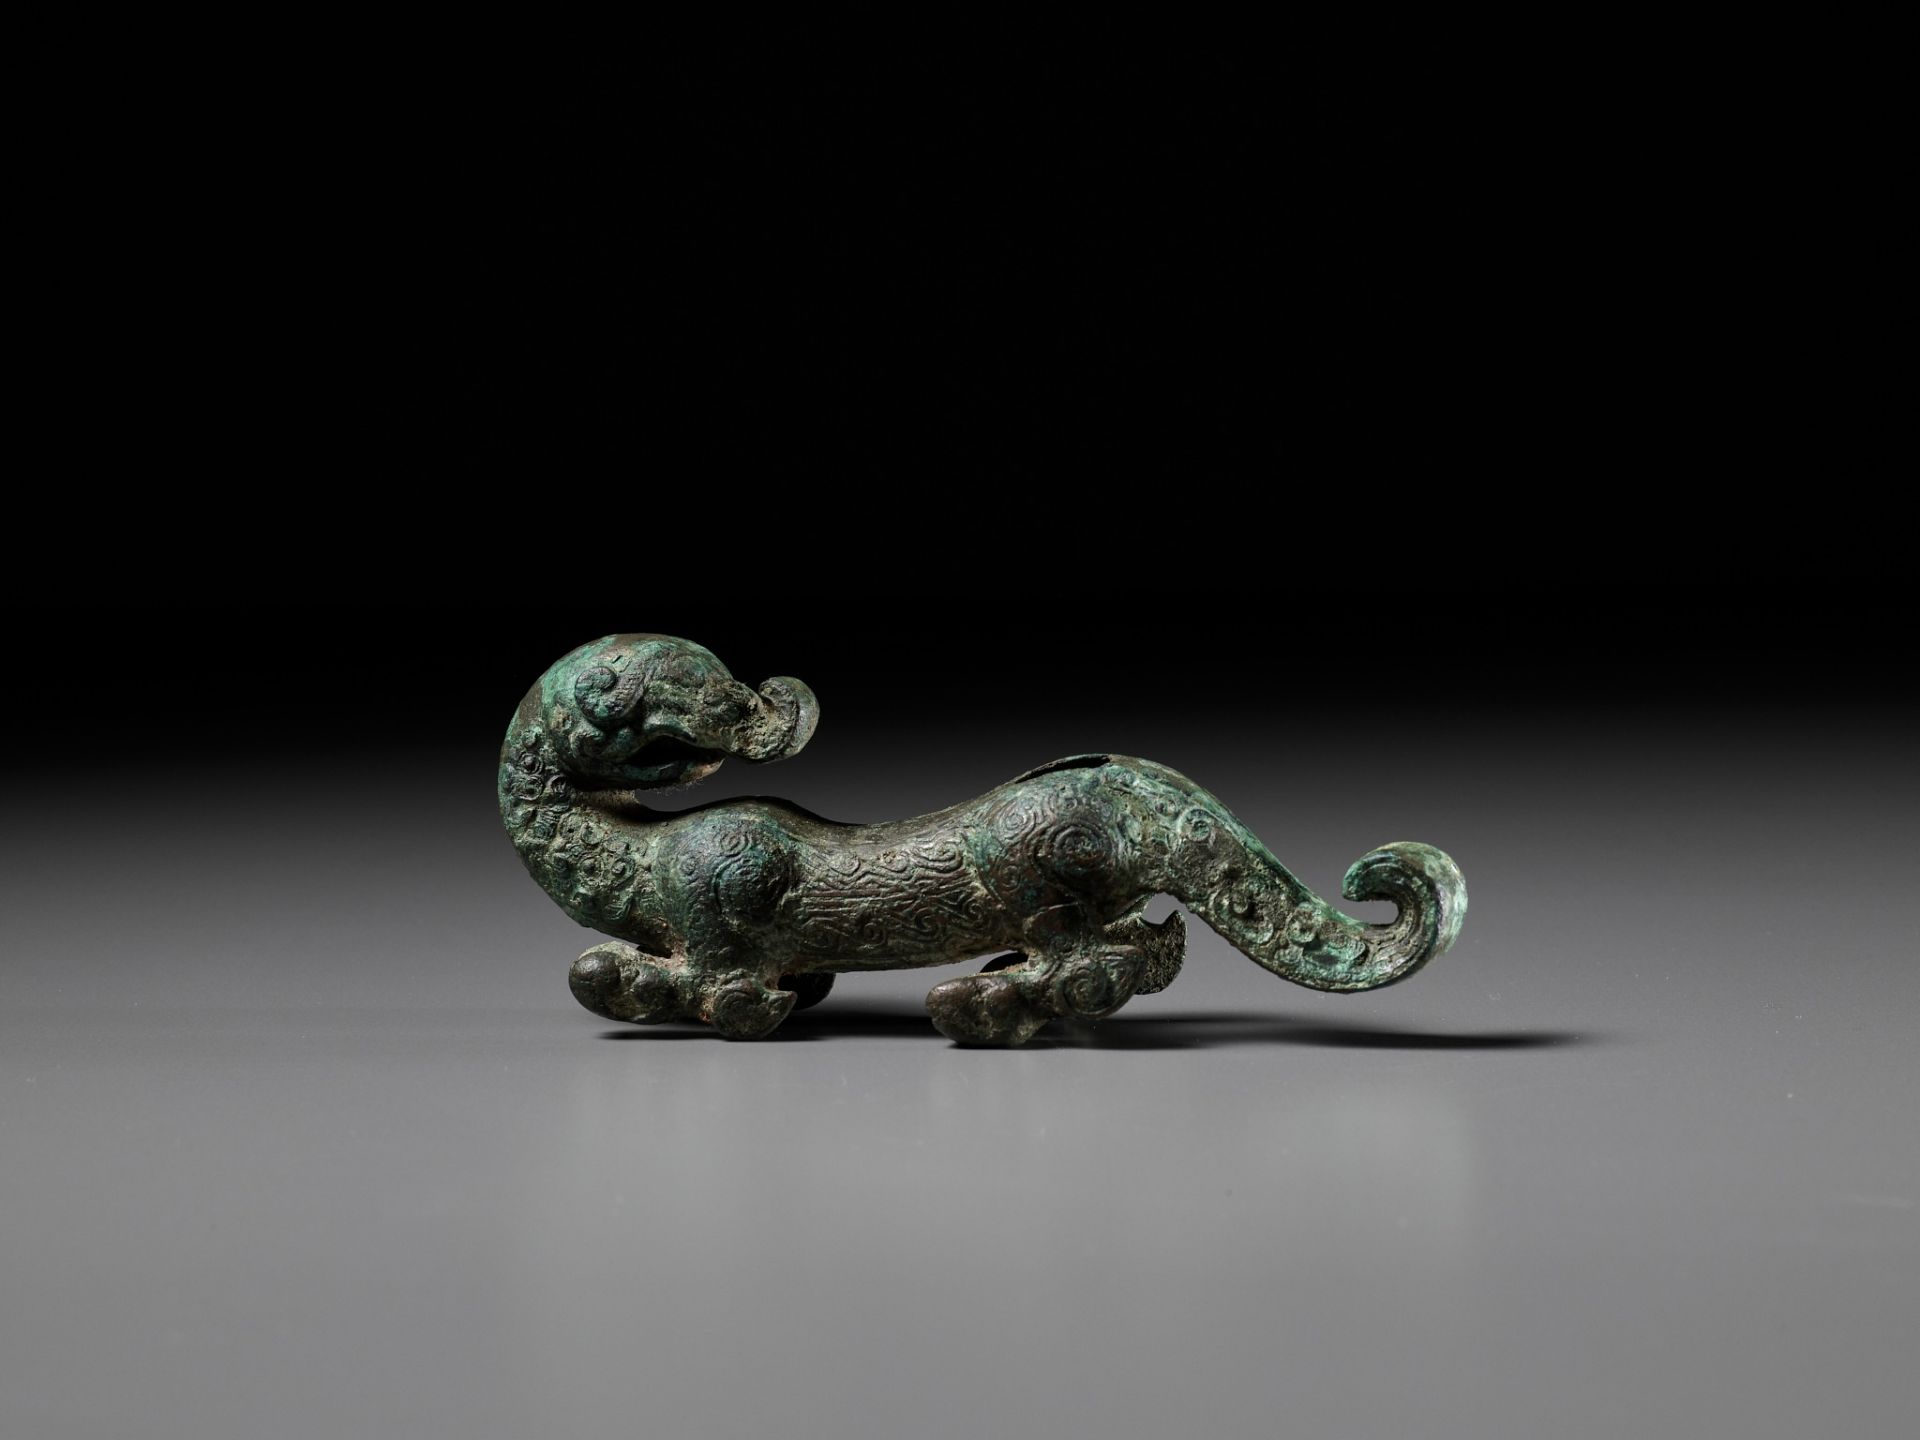 A SUPERB BRONZE FIGURE OF A DRAGON, EASTERN ZHOU DYNASTY, CHINA, 770-256 BC - Image 13 of 23